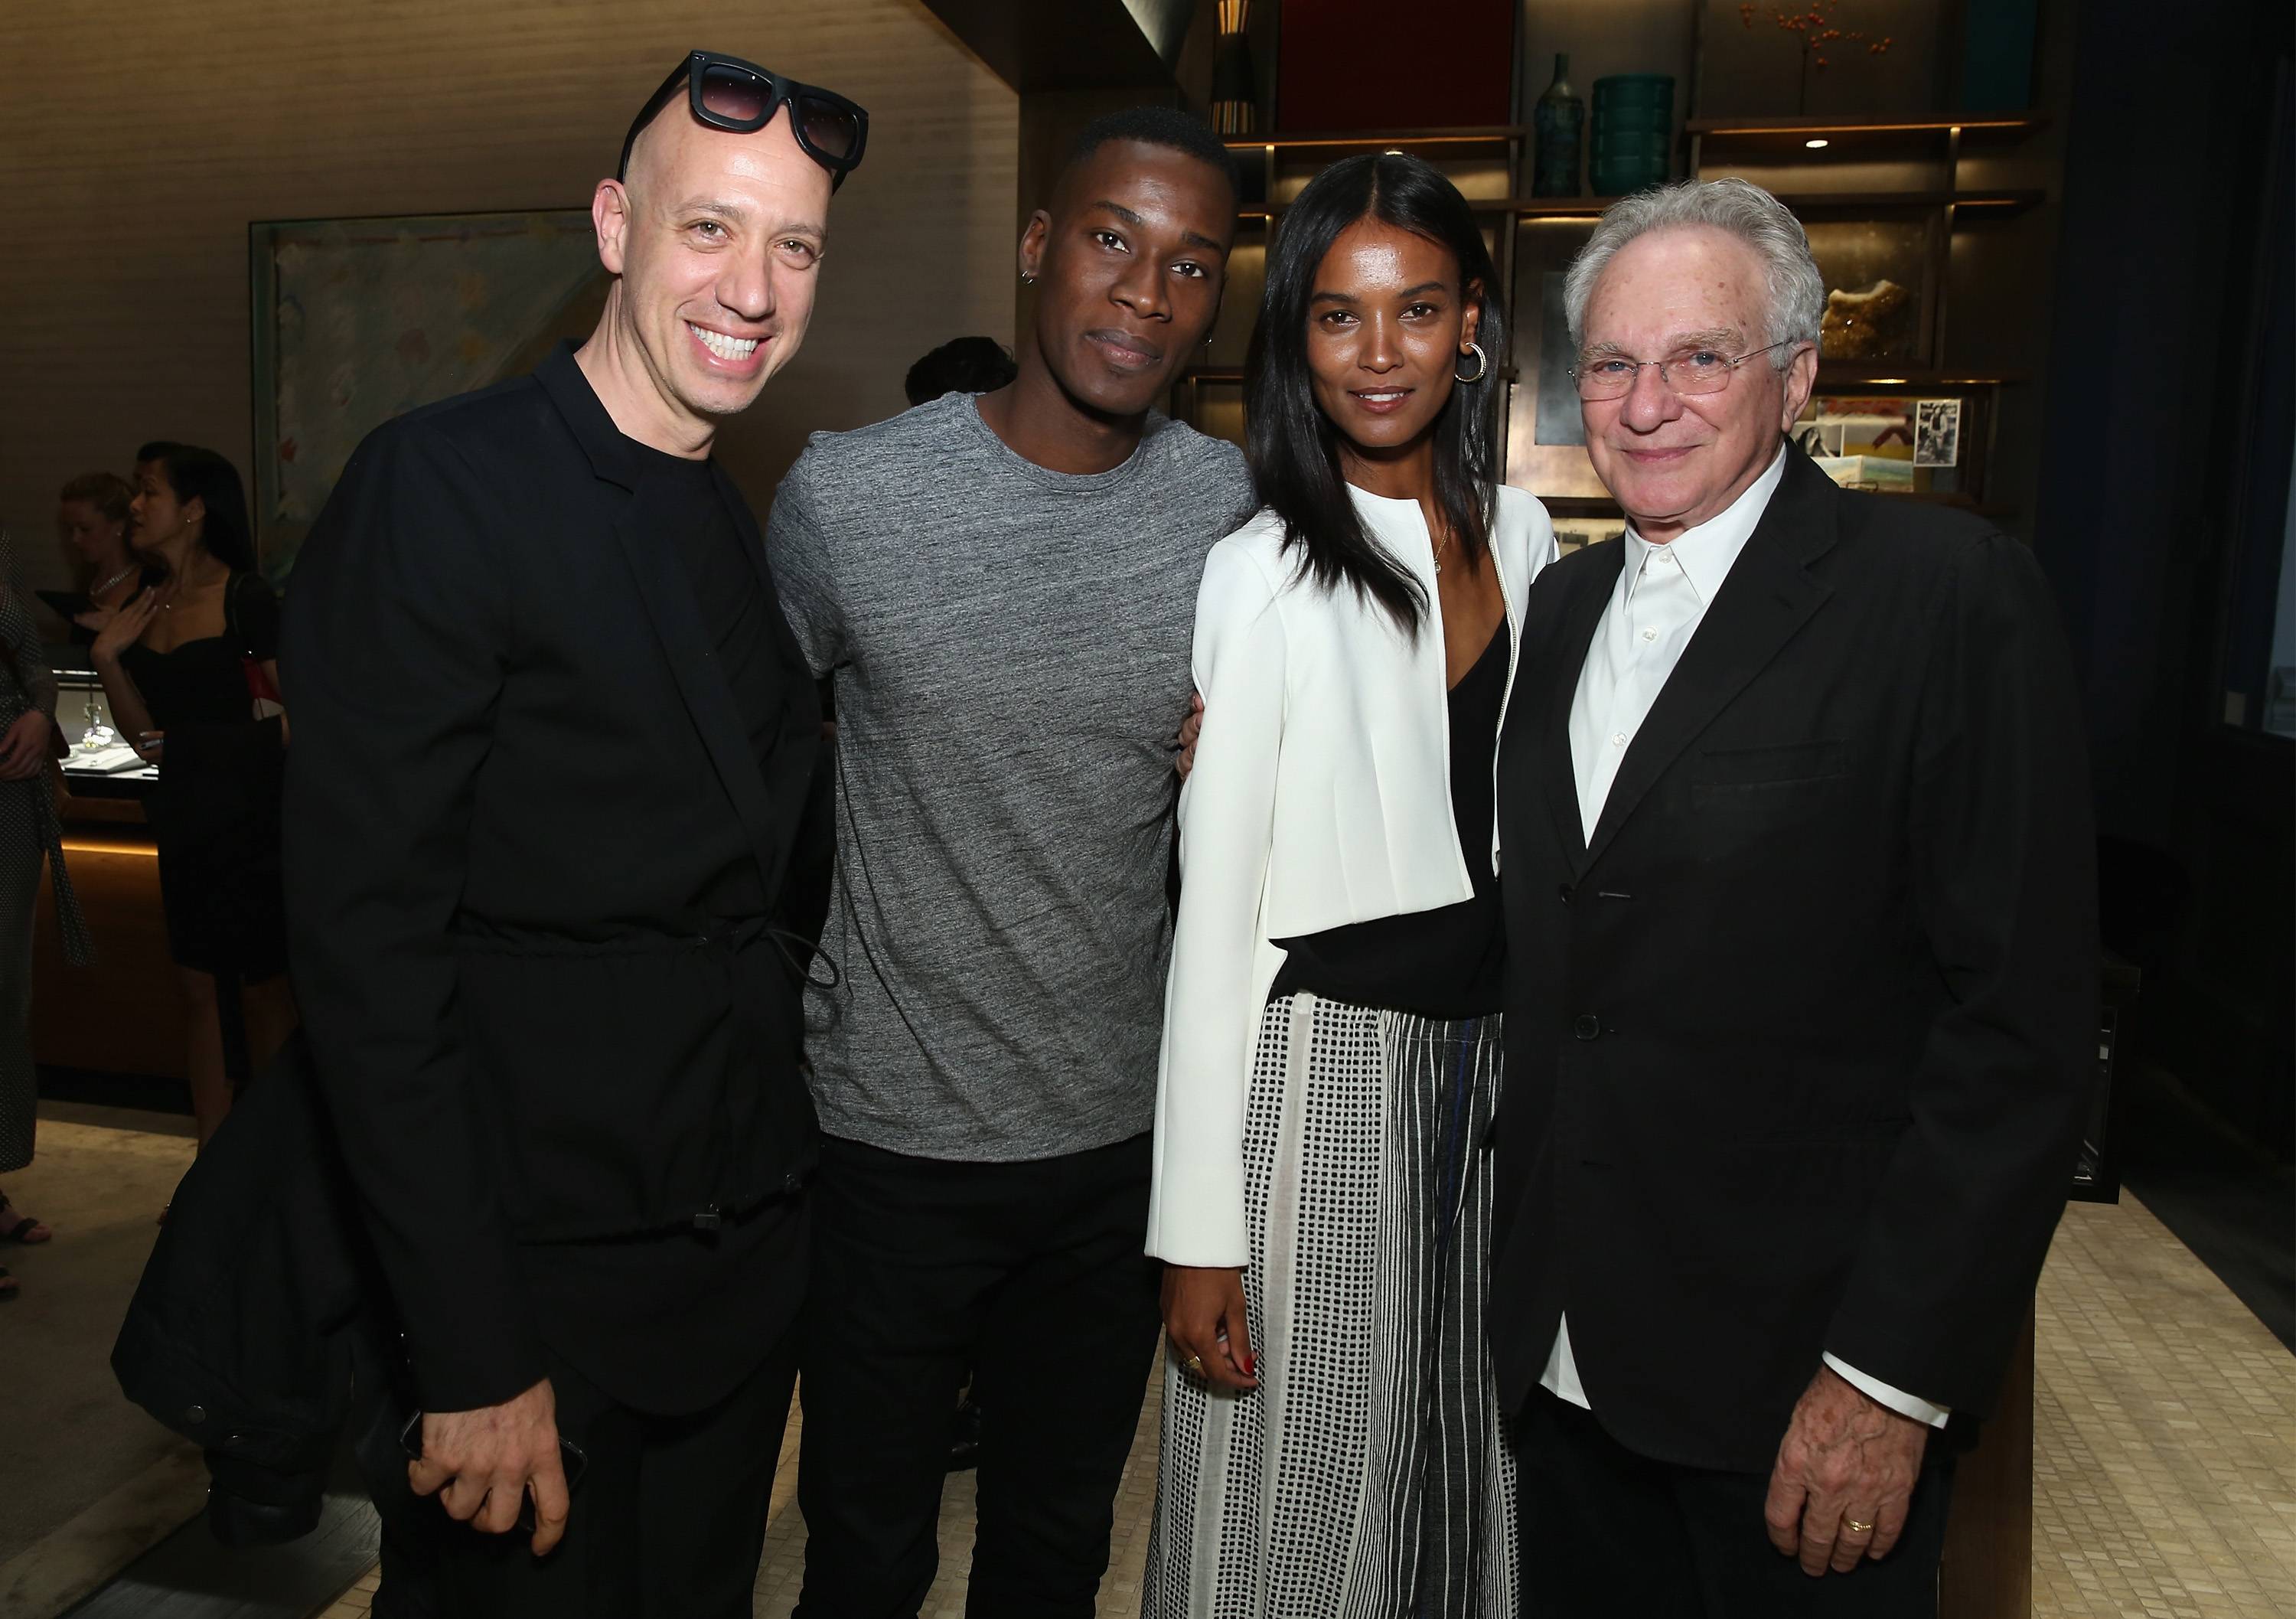 NEW YORK, NY - MAY 05:  Robert Verdi, David Agbodji, Liya Kebede and David Yurman attend the Liya Kebede and David Yurman hosted in-store event to benefit The Liya Kebede Foundation at David Yurman Soho Boutique on May 5, 2015 in New York City.  (Photo by Cindy Ord/Getty Images for David Yurman)